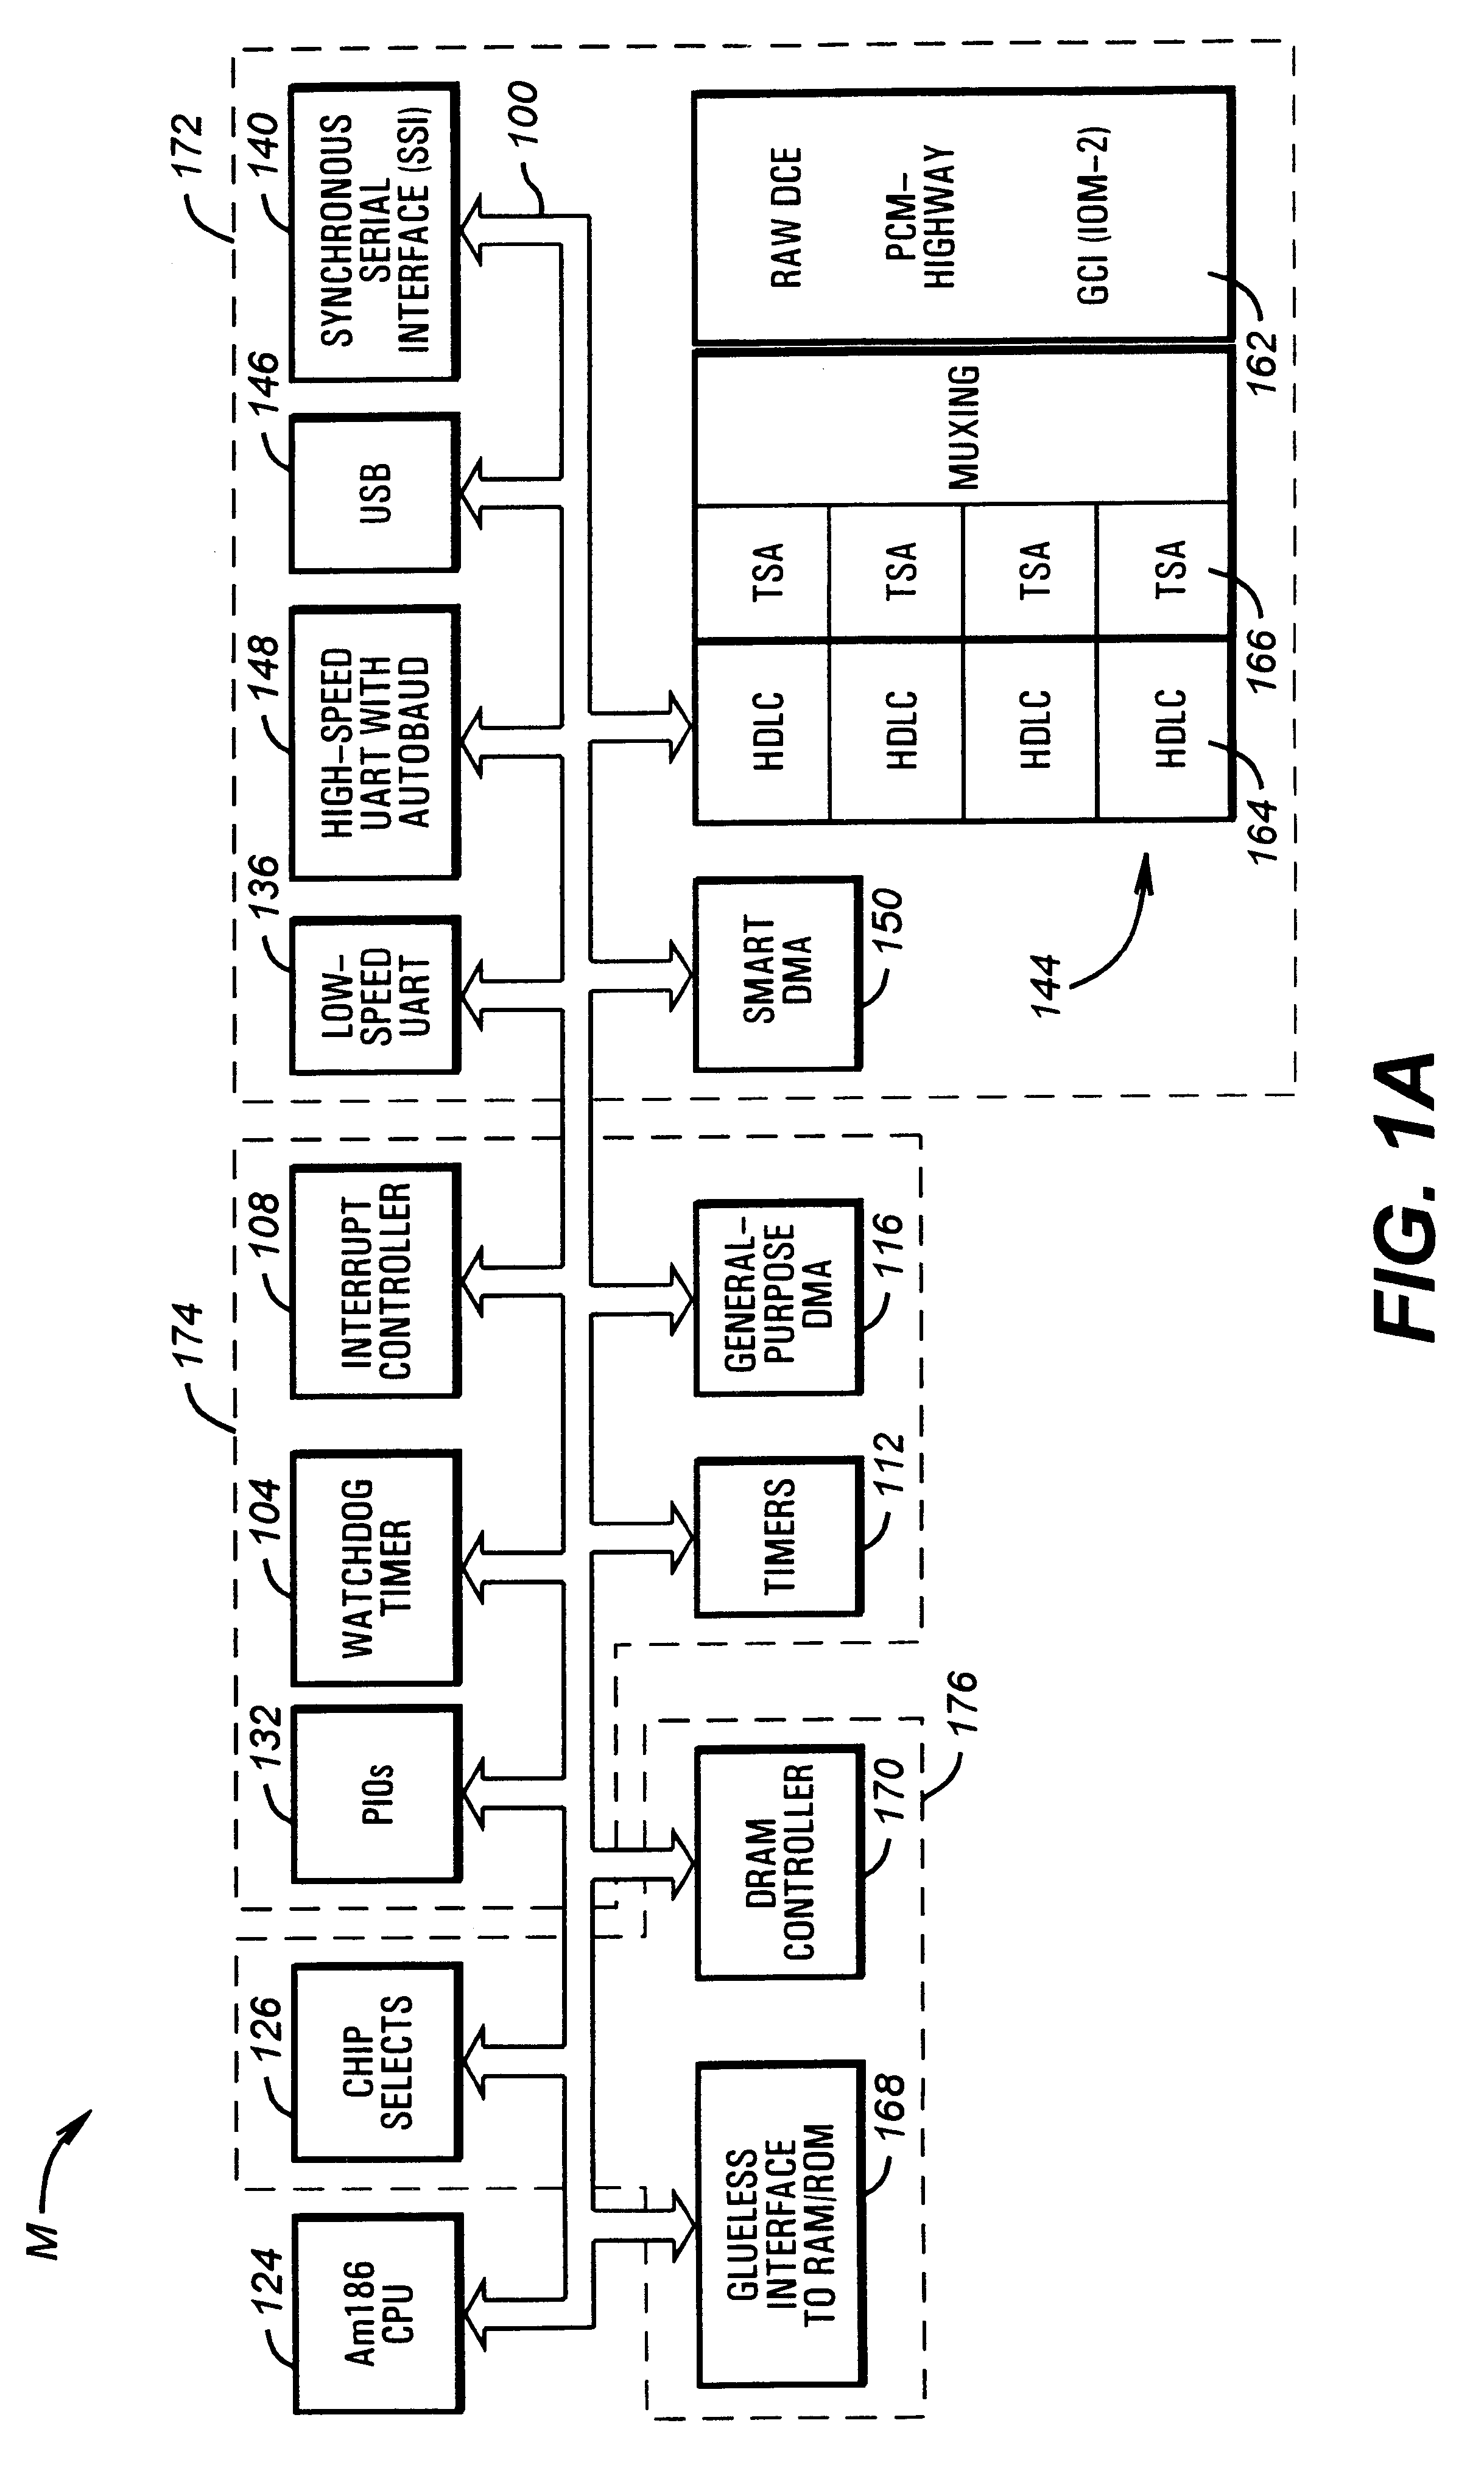 Autobauding with adjustment to a programmable baud rate